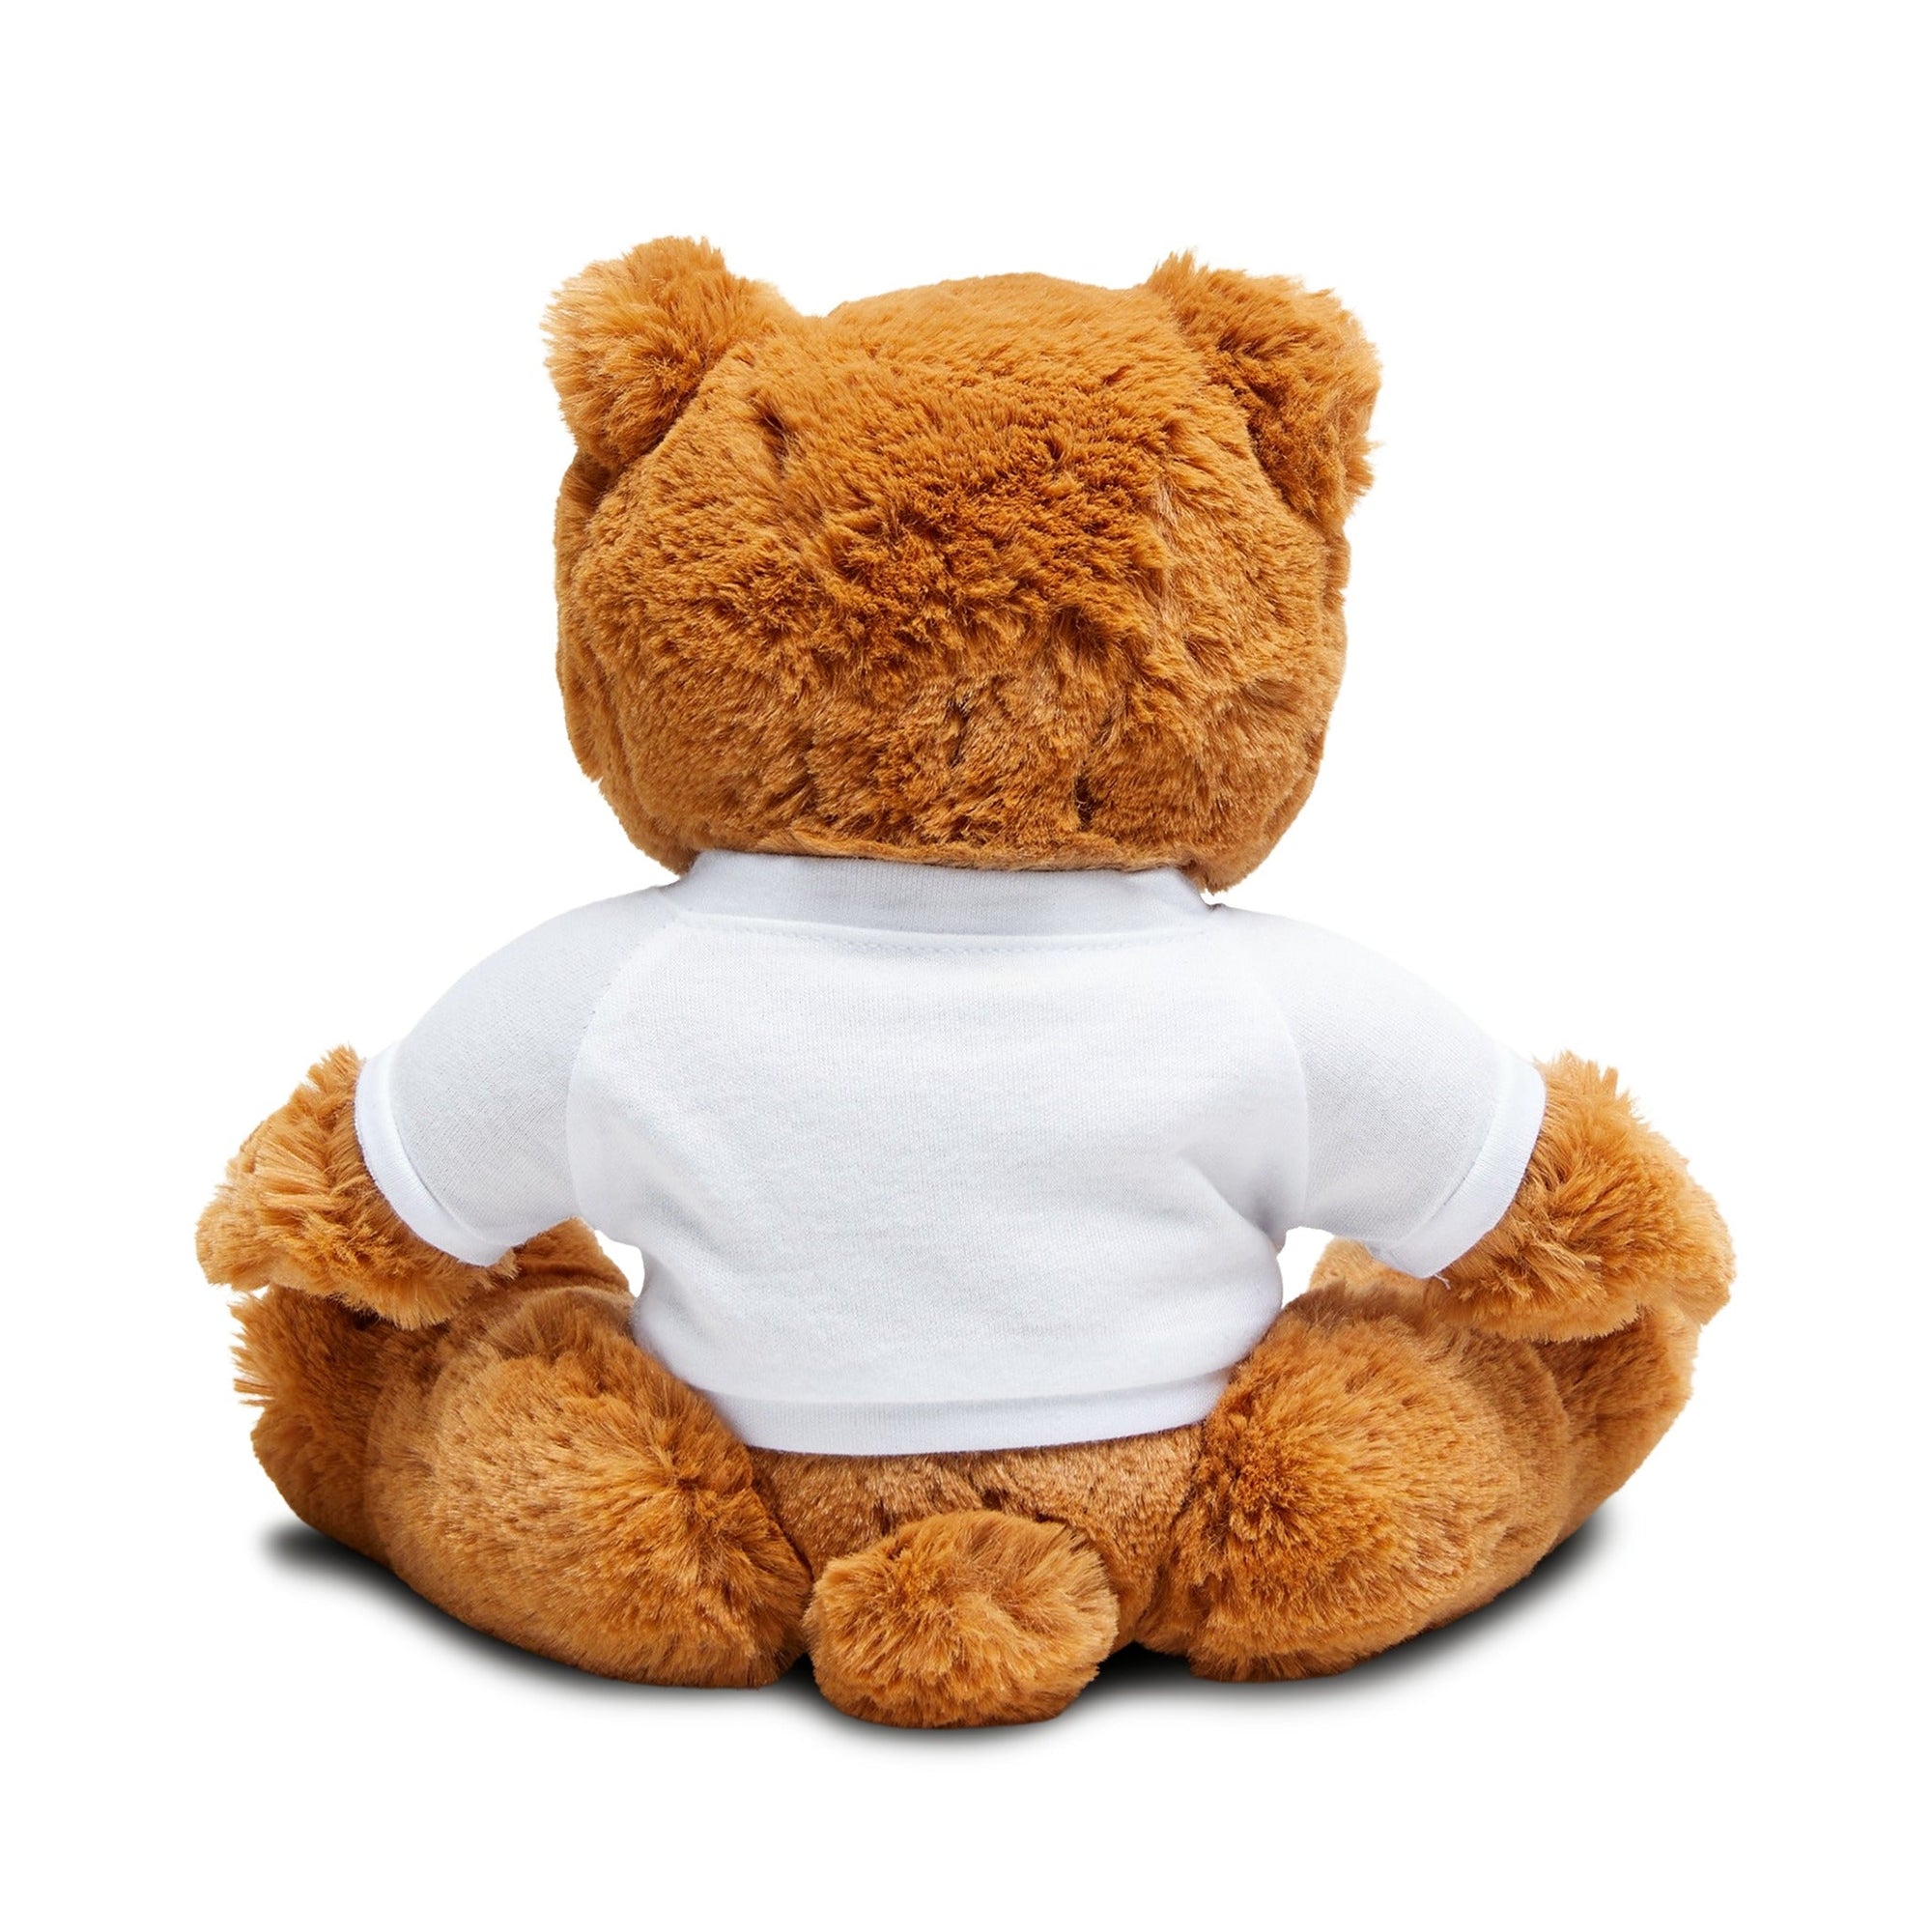 You can be yourself with me - Plush Teddy Bear